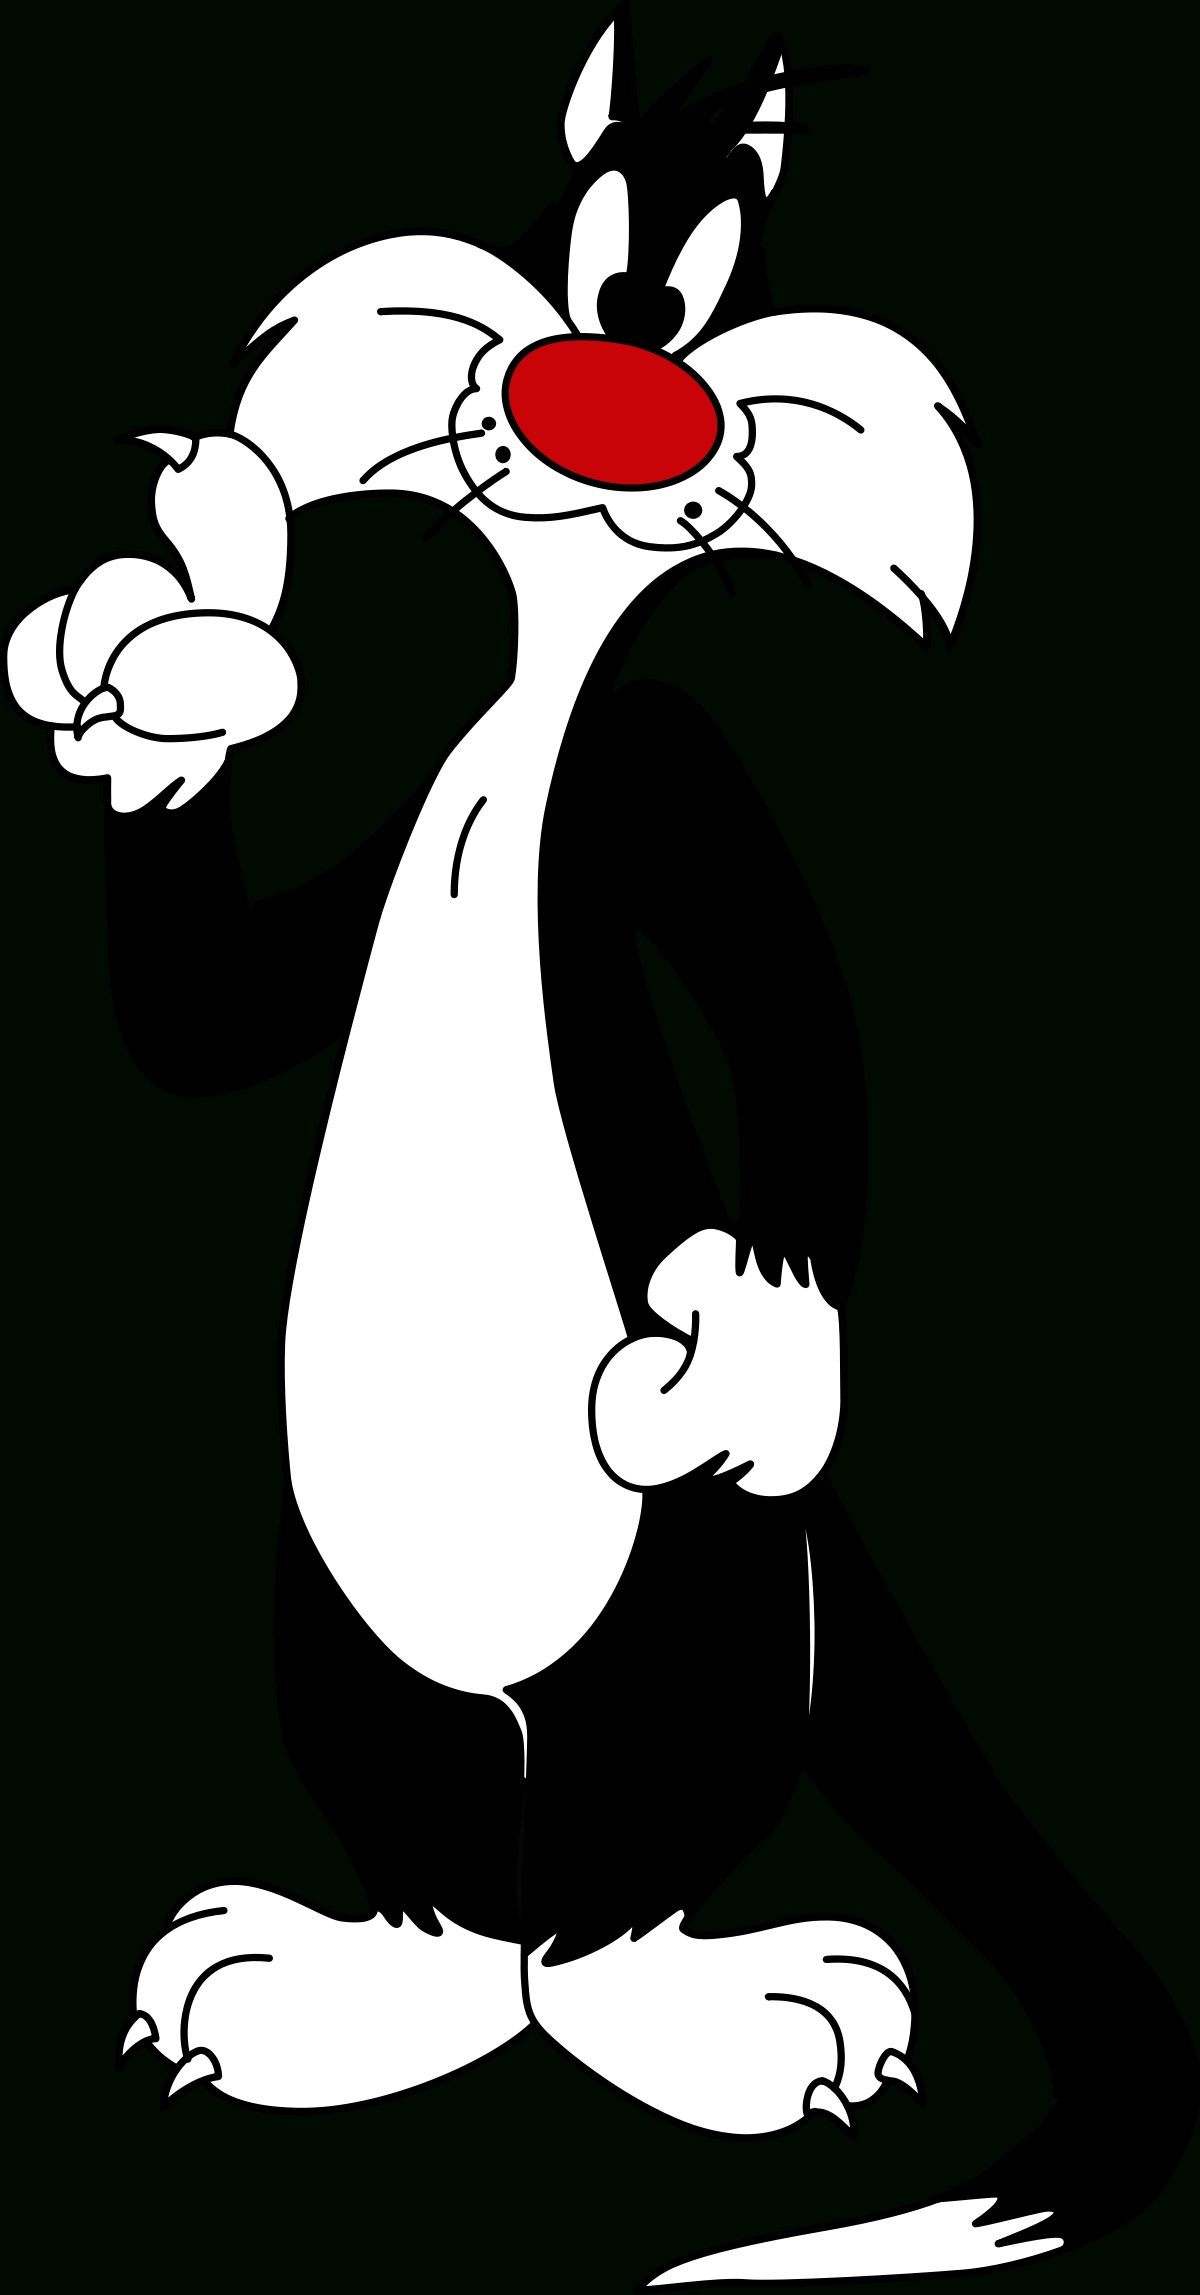 sylvester the cat - wikipedia